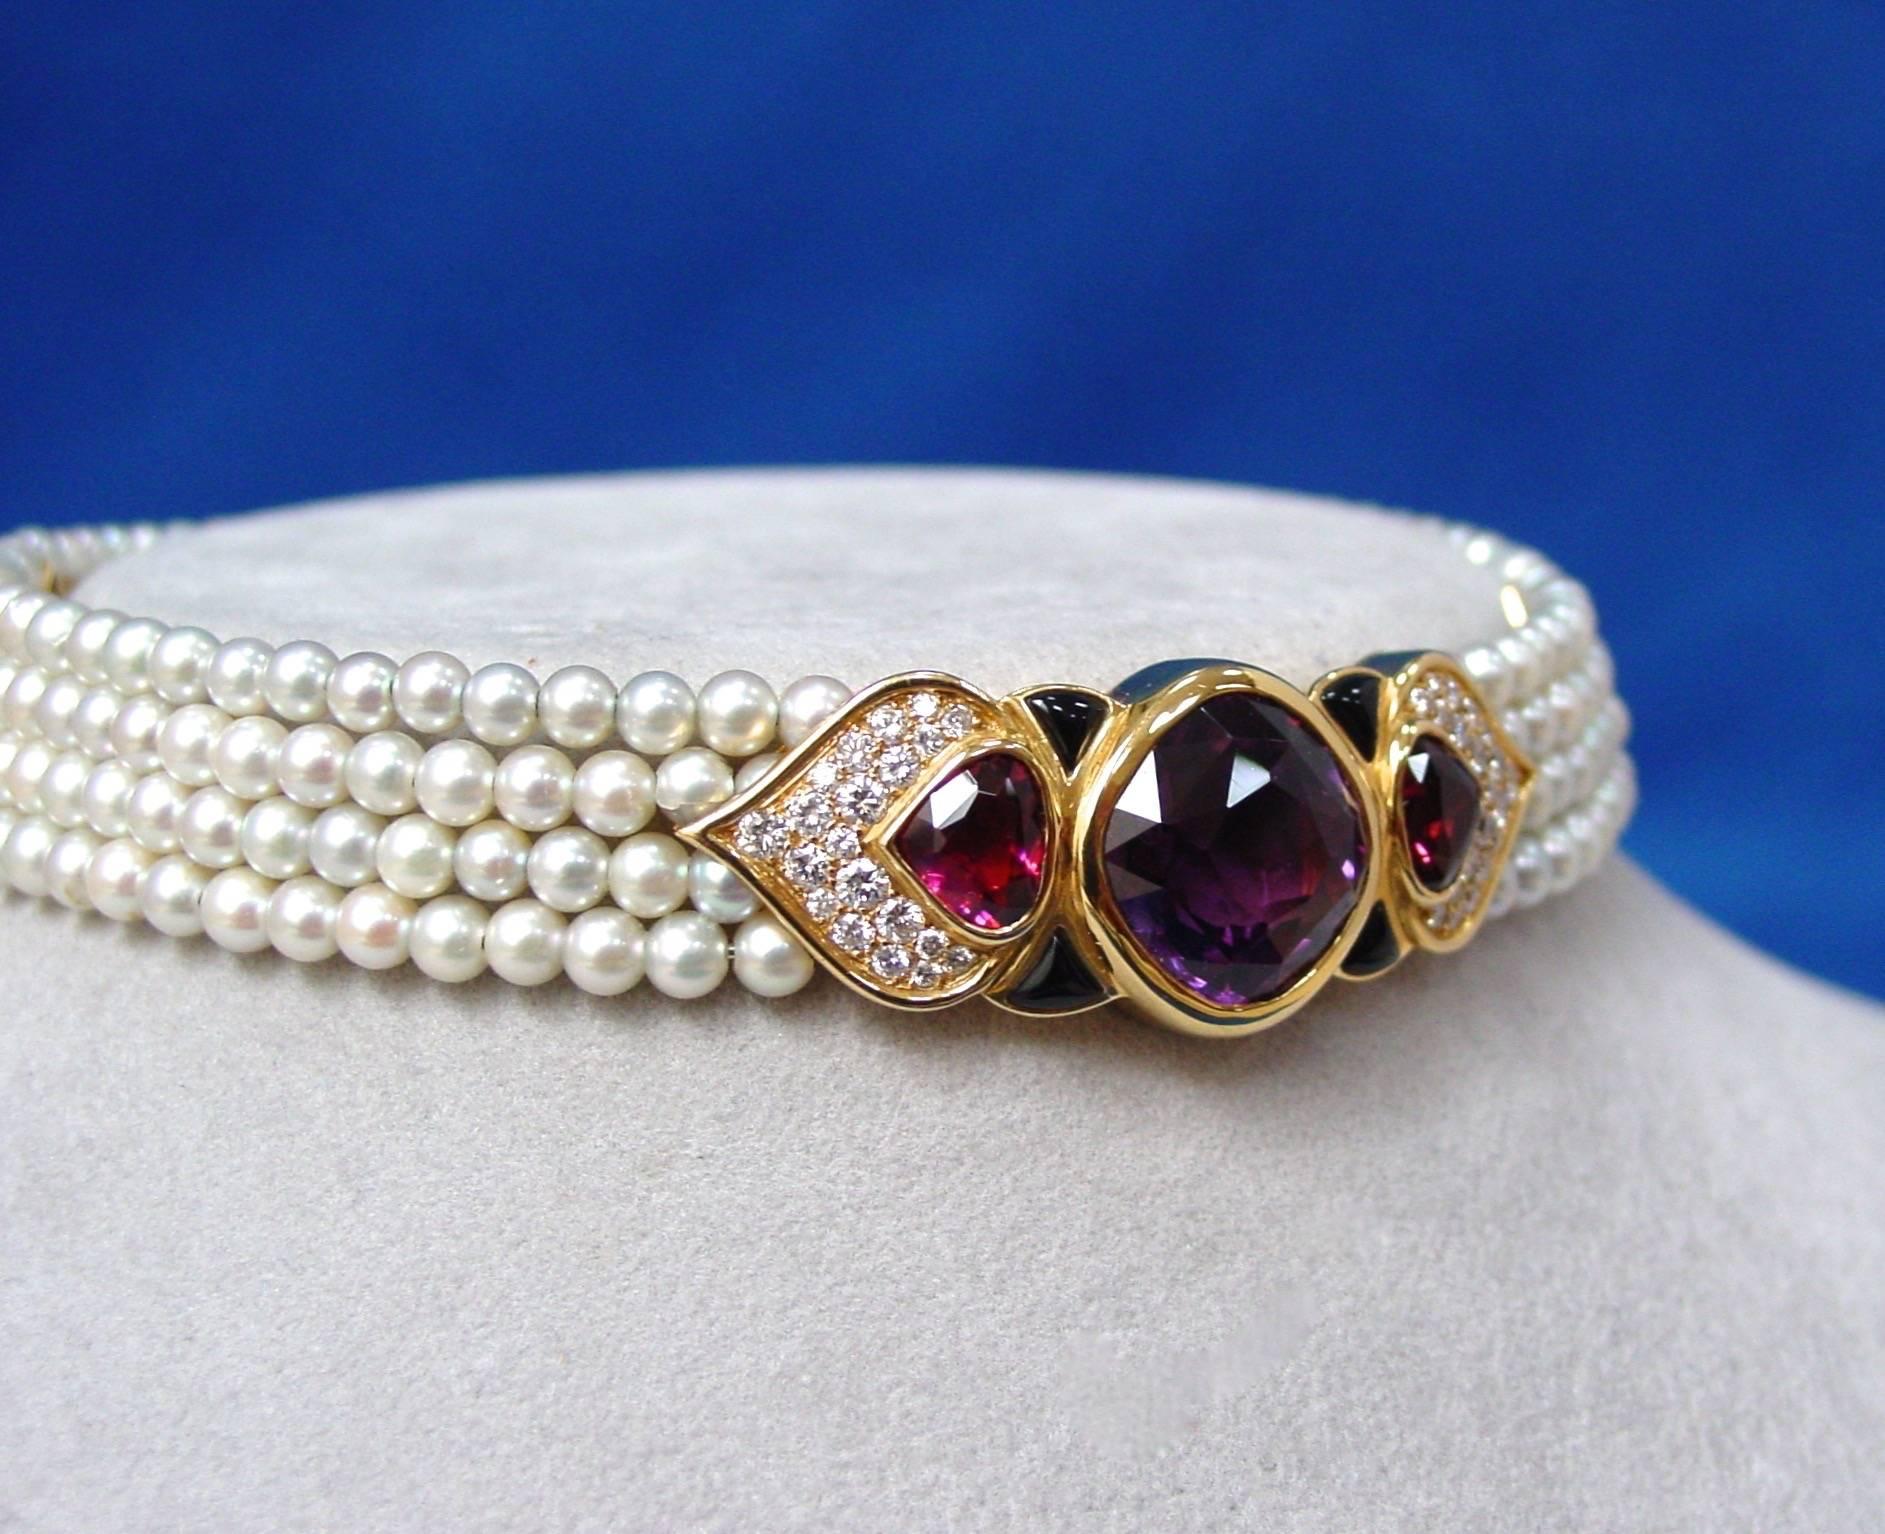 A Four Row Cultured Pearl, Amethyst, Pink Tourmaline, Diamond and Onyx “Pauline” Torque Necklace by Marina B. With maker’s mark and French hallmarks, France 18k A725. This classic necklace is set with approximately 1.60 carats of diamonds,